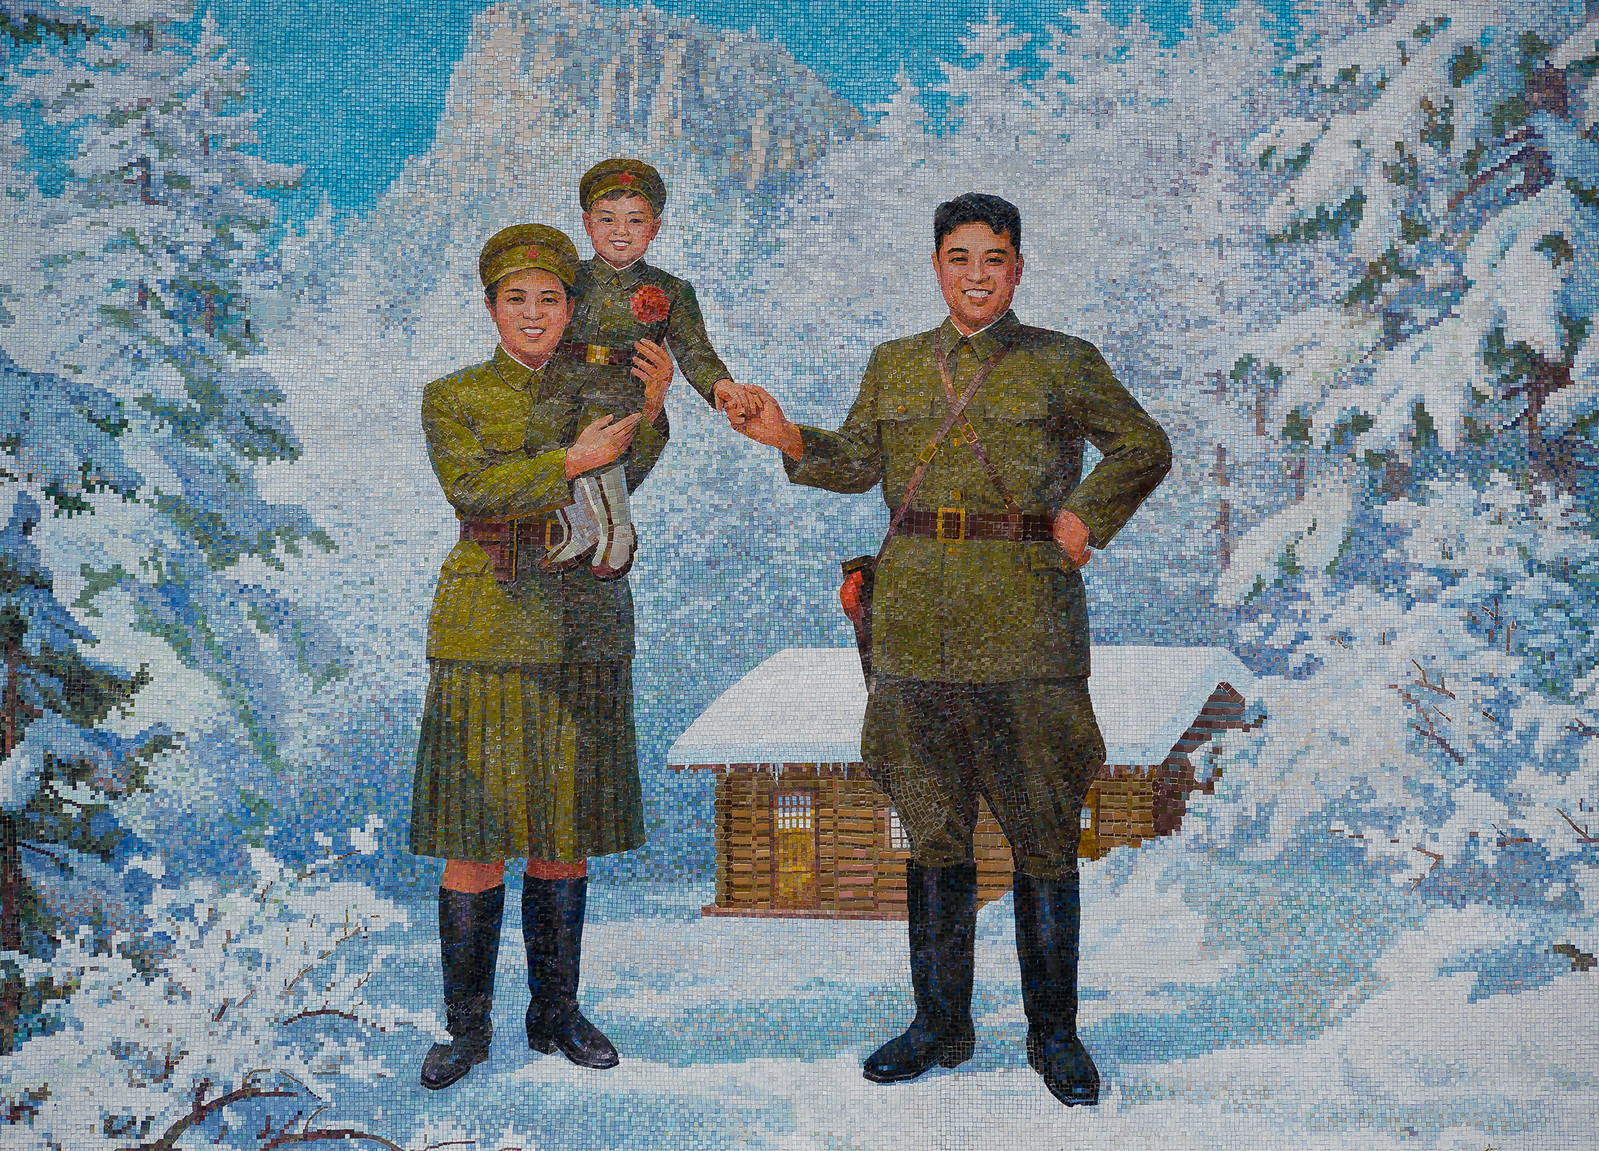 A public mosaic in North Korea of Kim Jong-Il in the arms of his mother Kim Jong-suk and his father Kim Il-sung.